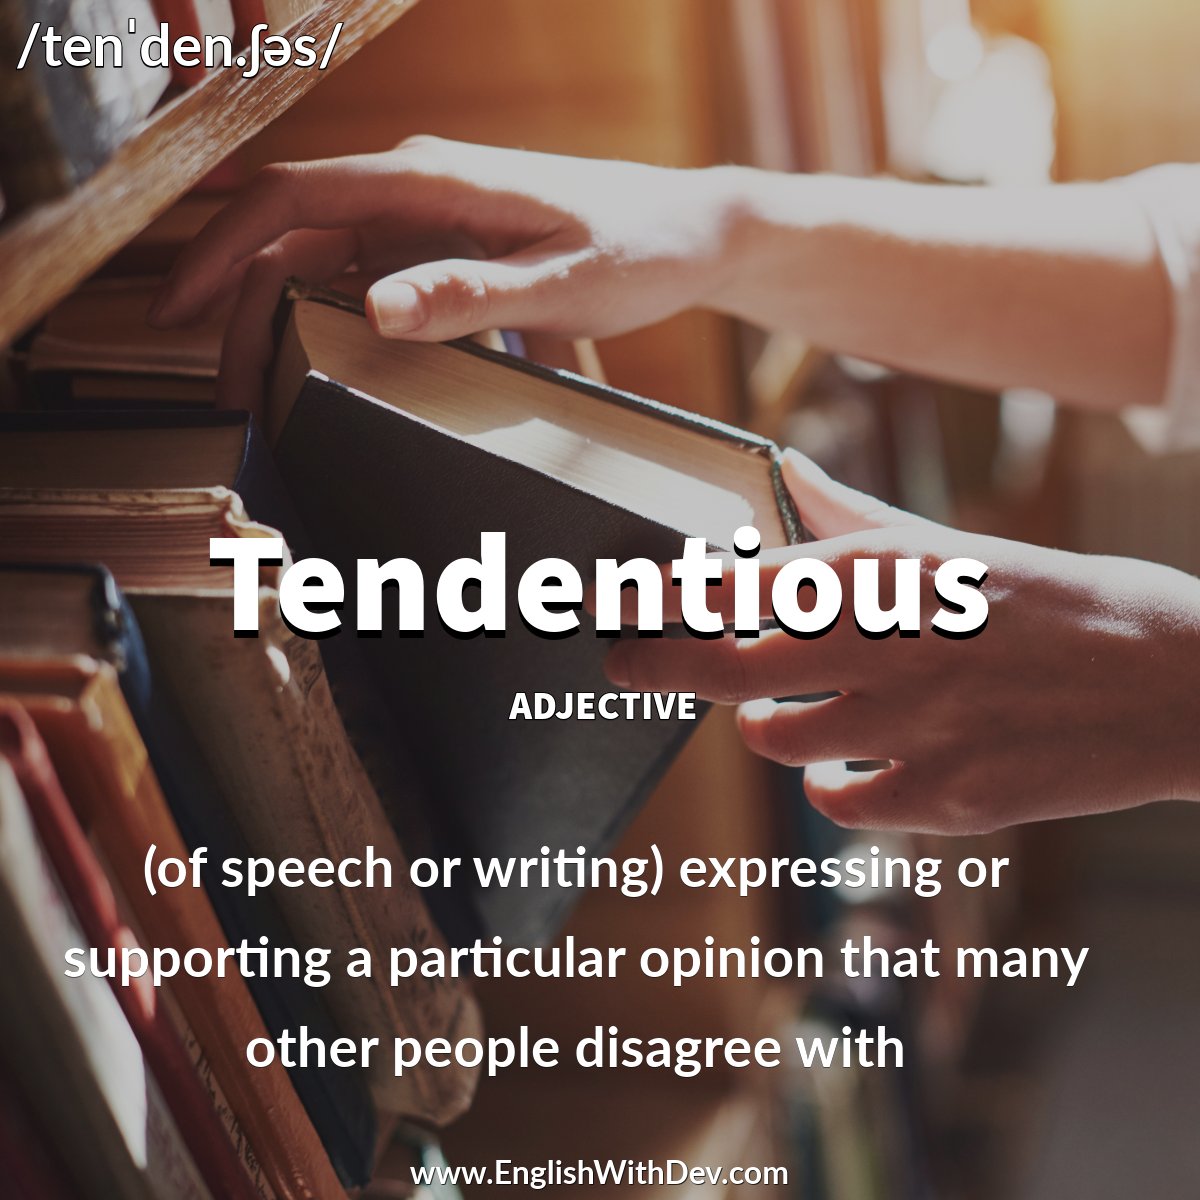 Word of the day - Tendentious

'He made some extremely tendentious remarks.'